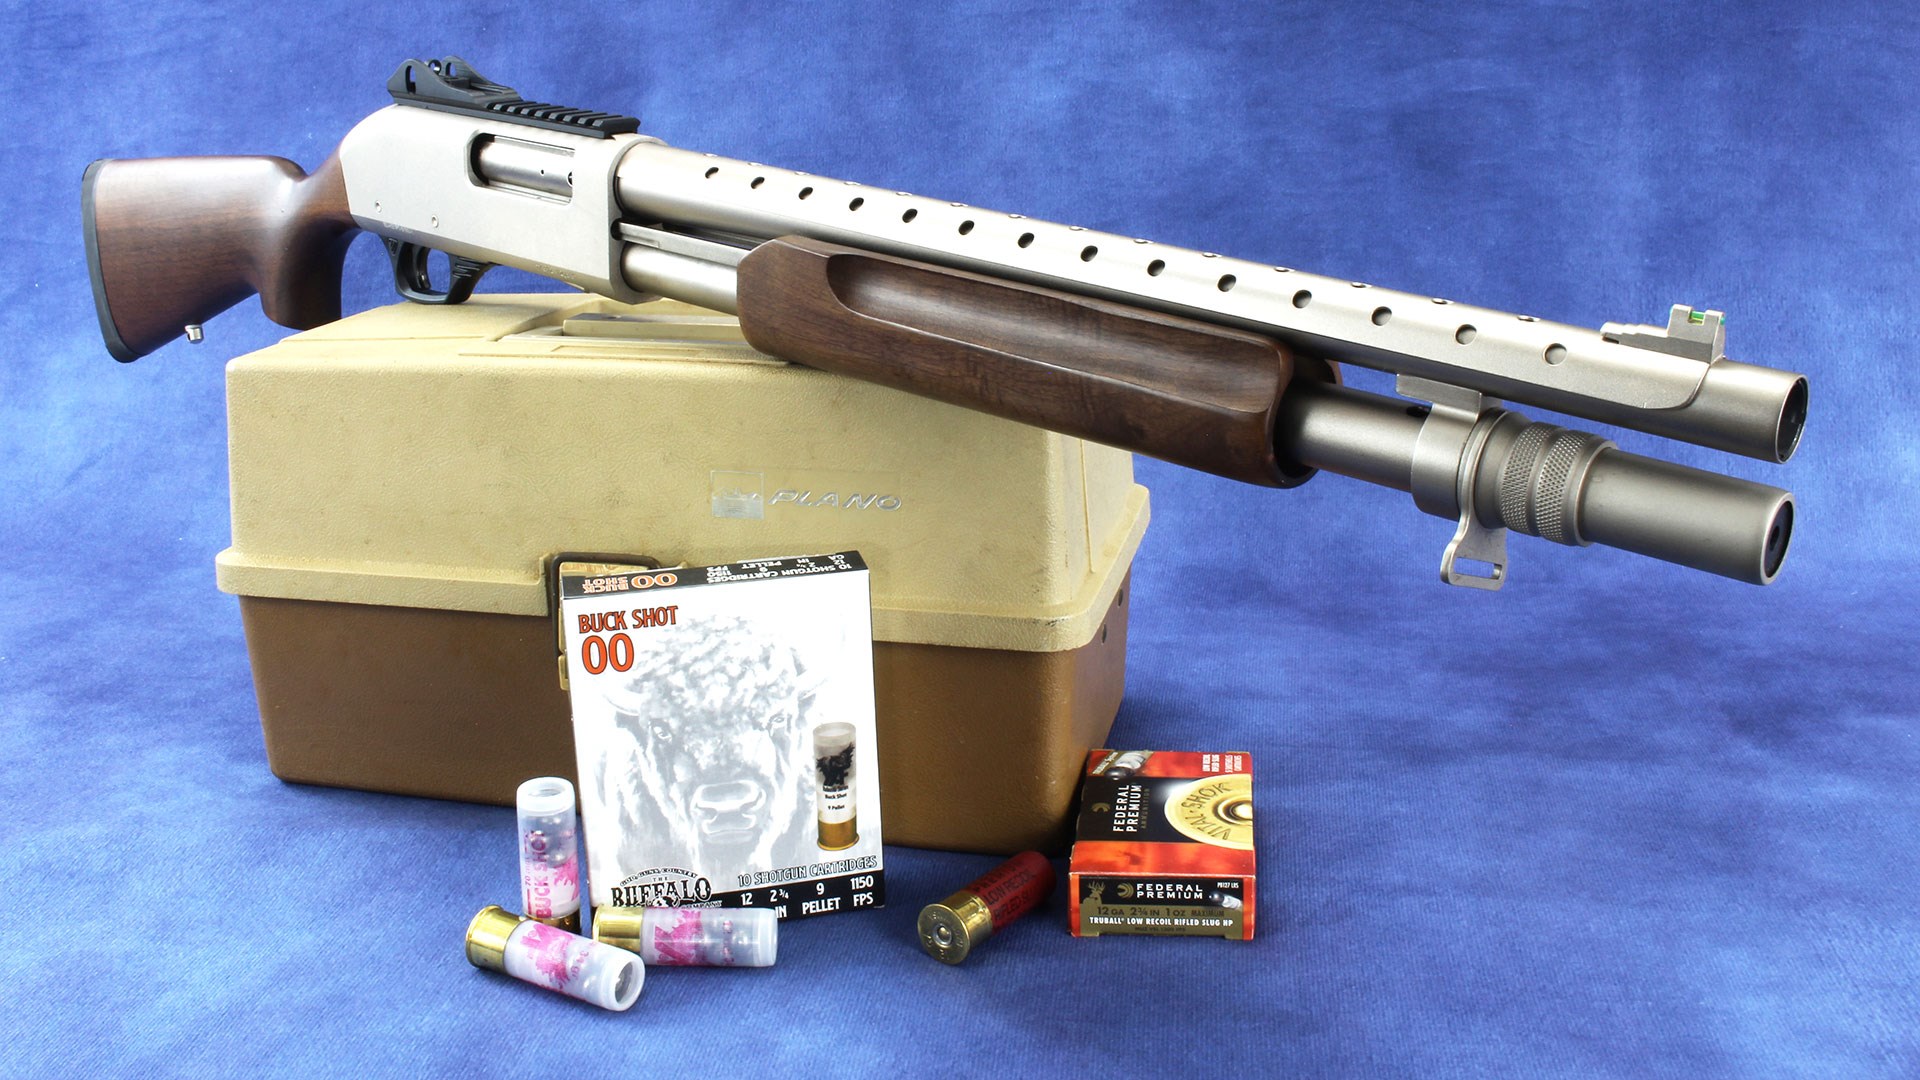 The Tokarev USA TX3 12HMD, silver in color with walnut stock, with ammunition and a tackle box.